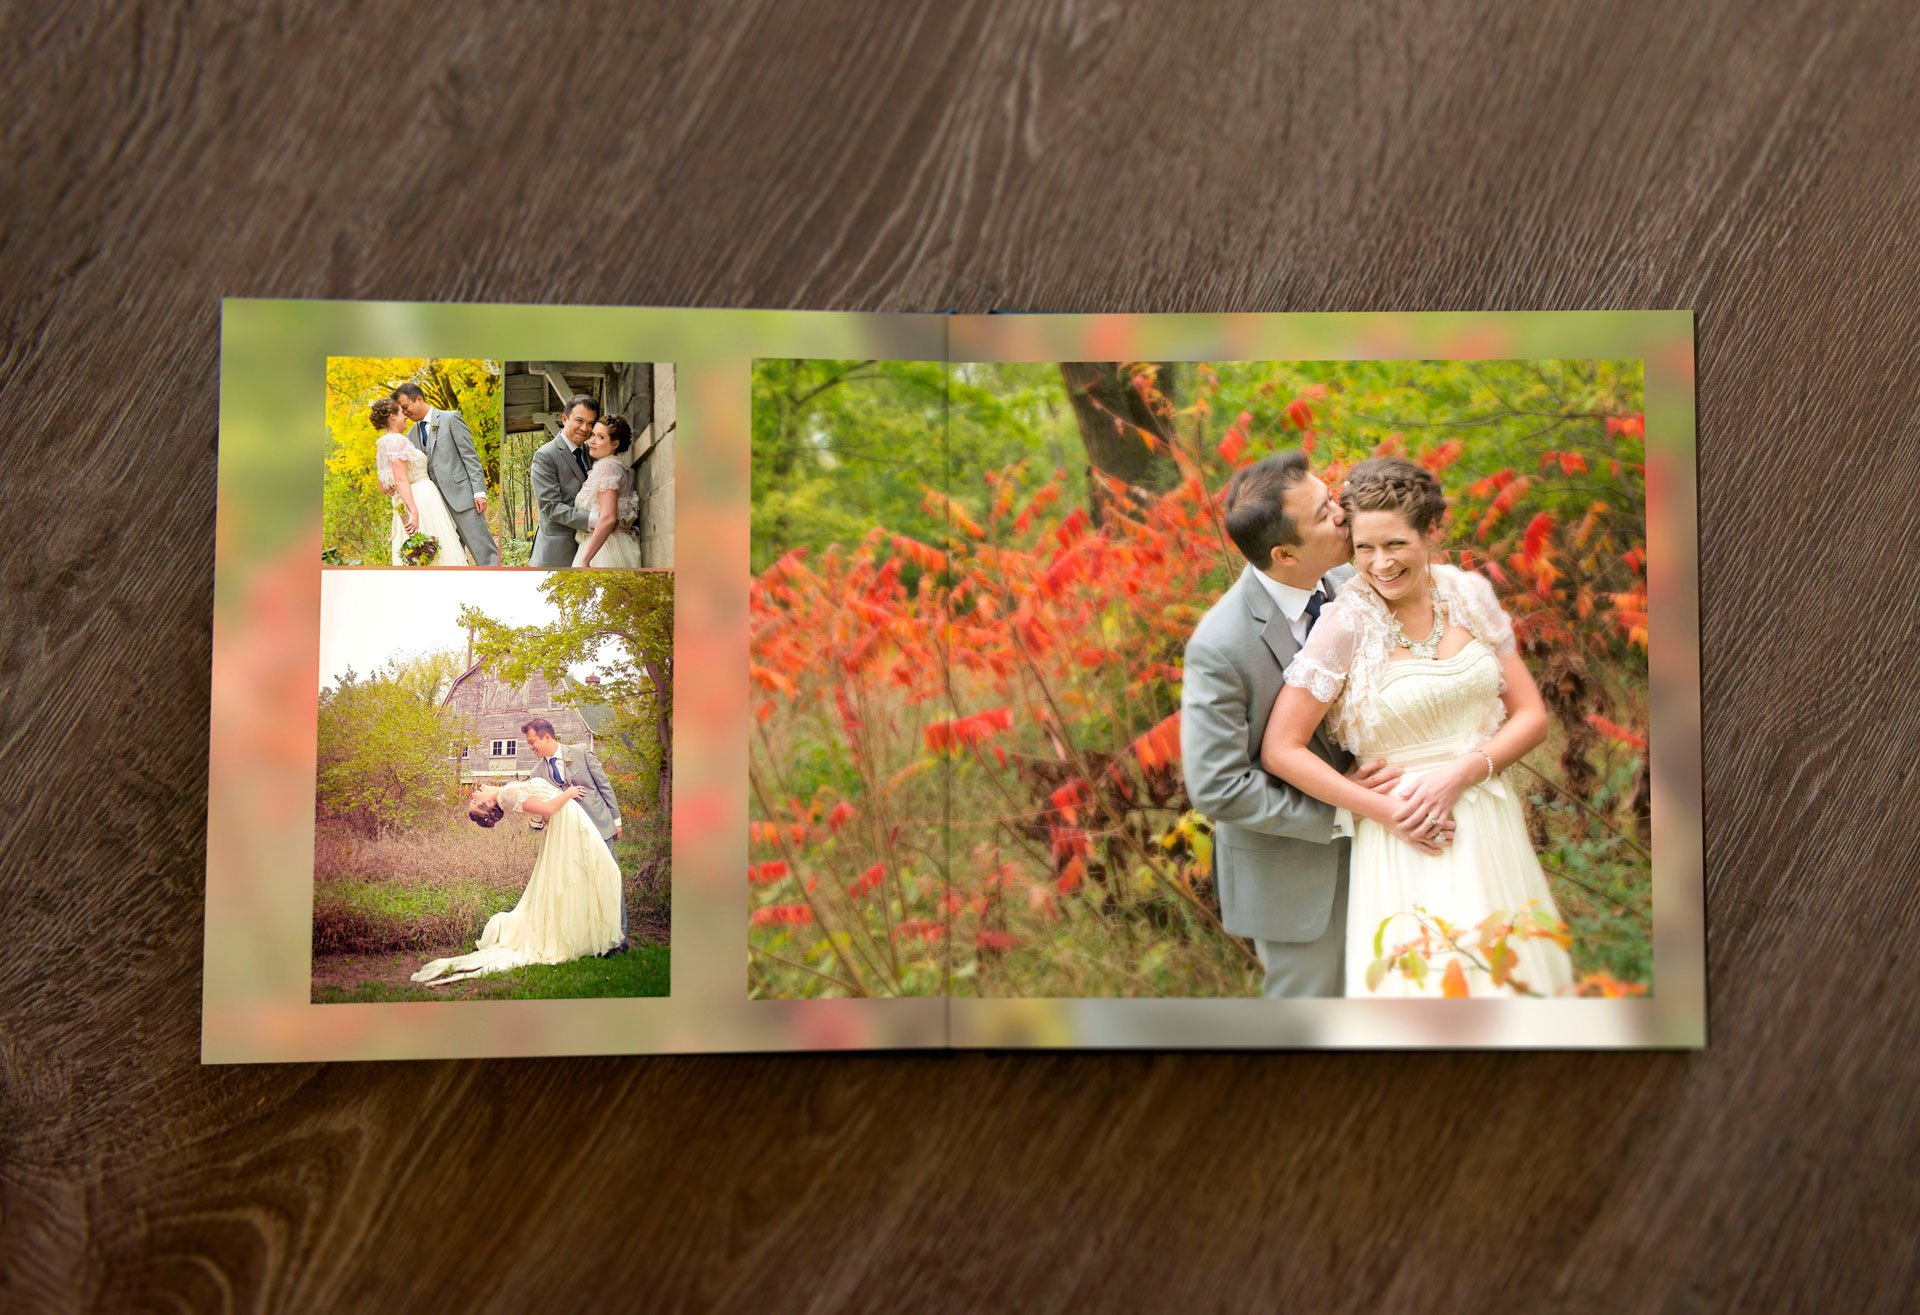 Sales Marketing for Professional Wedding Albums